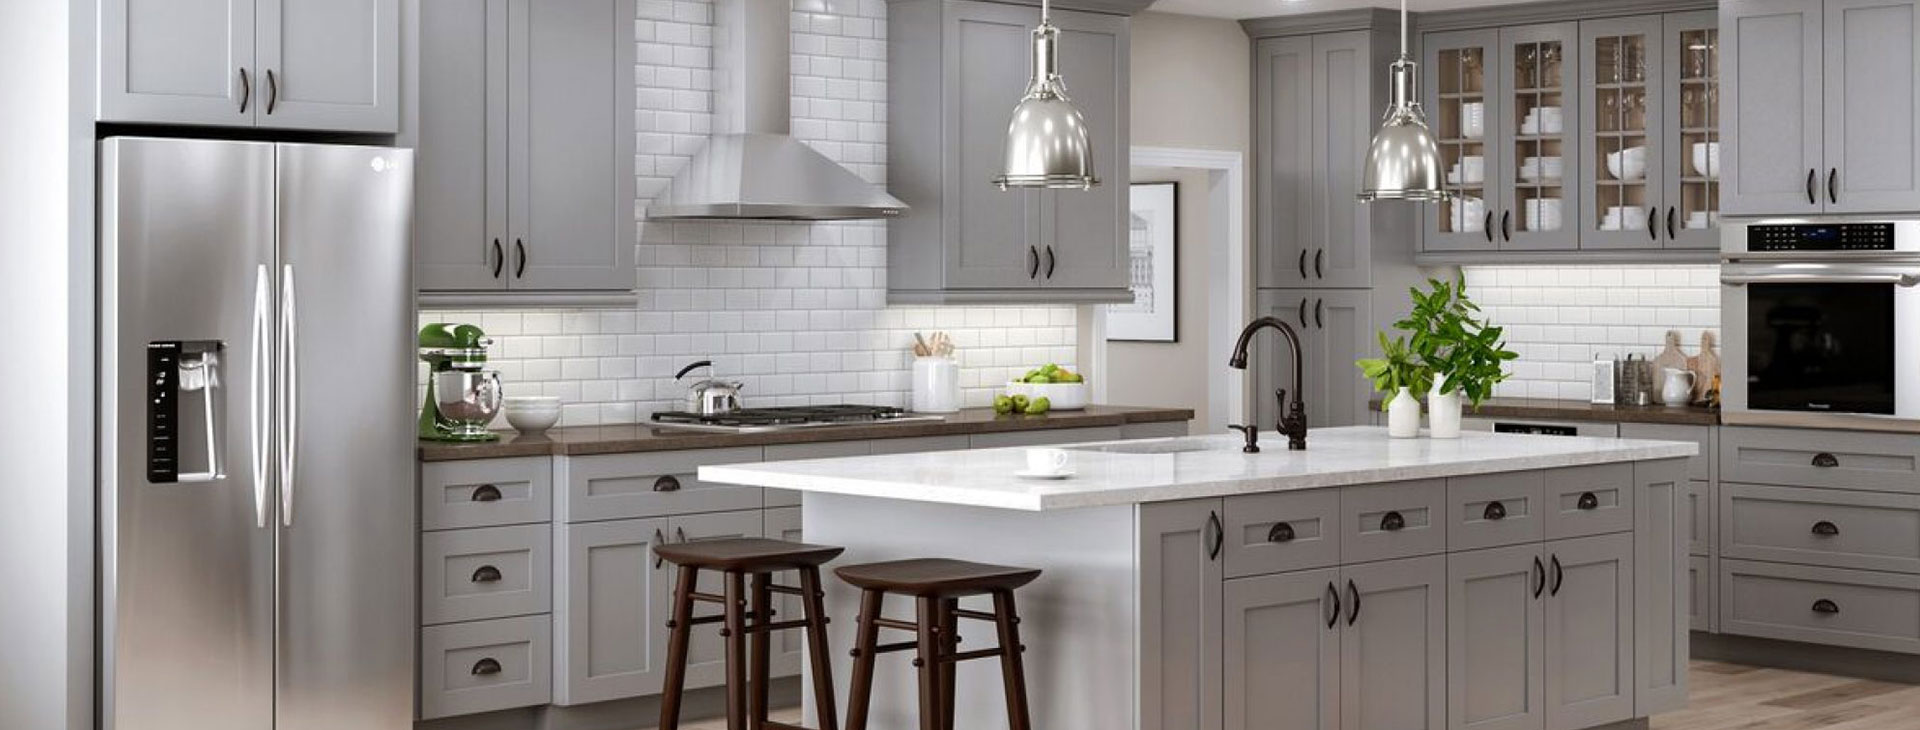 kitchen-remodel-kitchen-remodeling-contractors-chicago